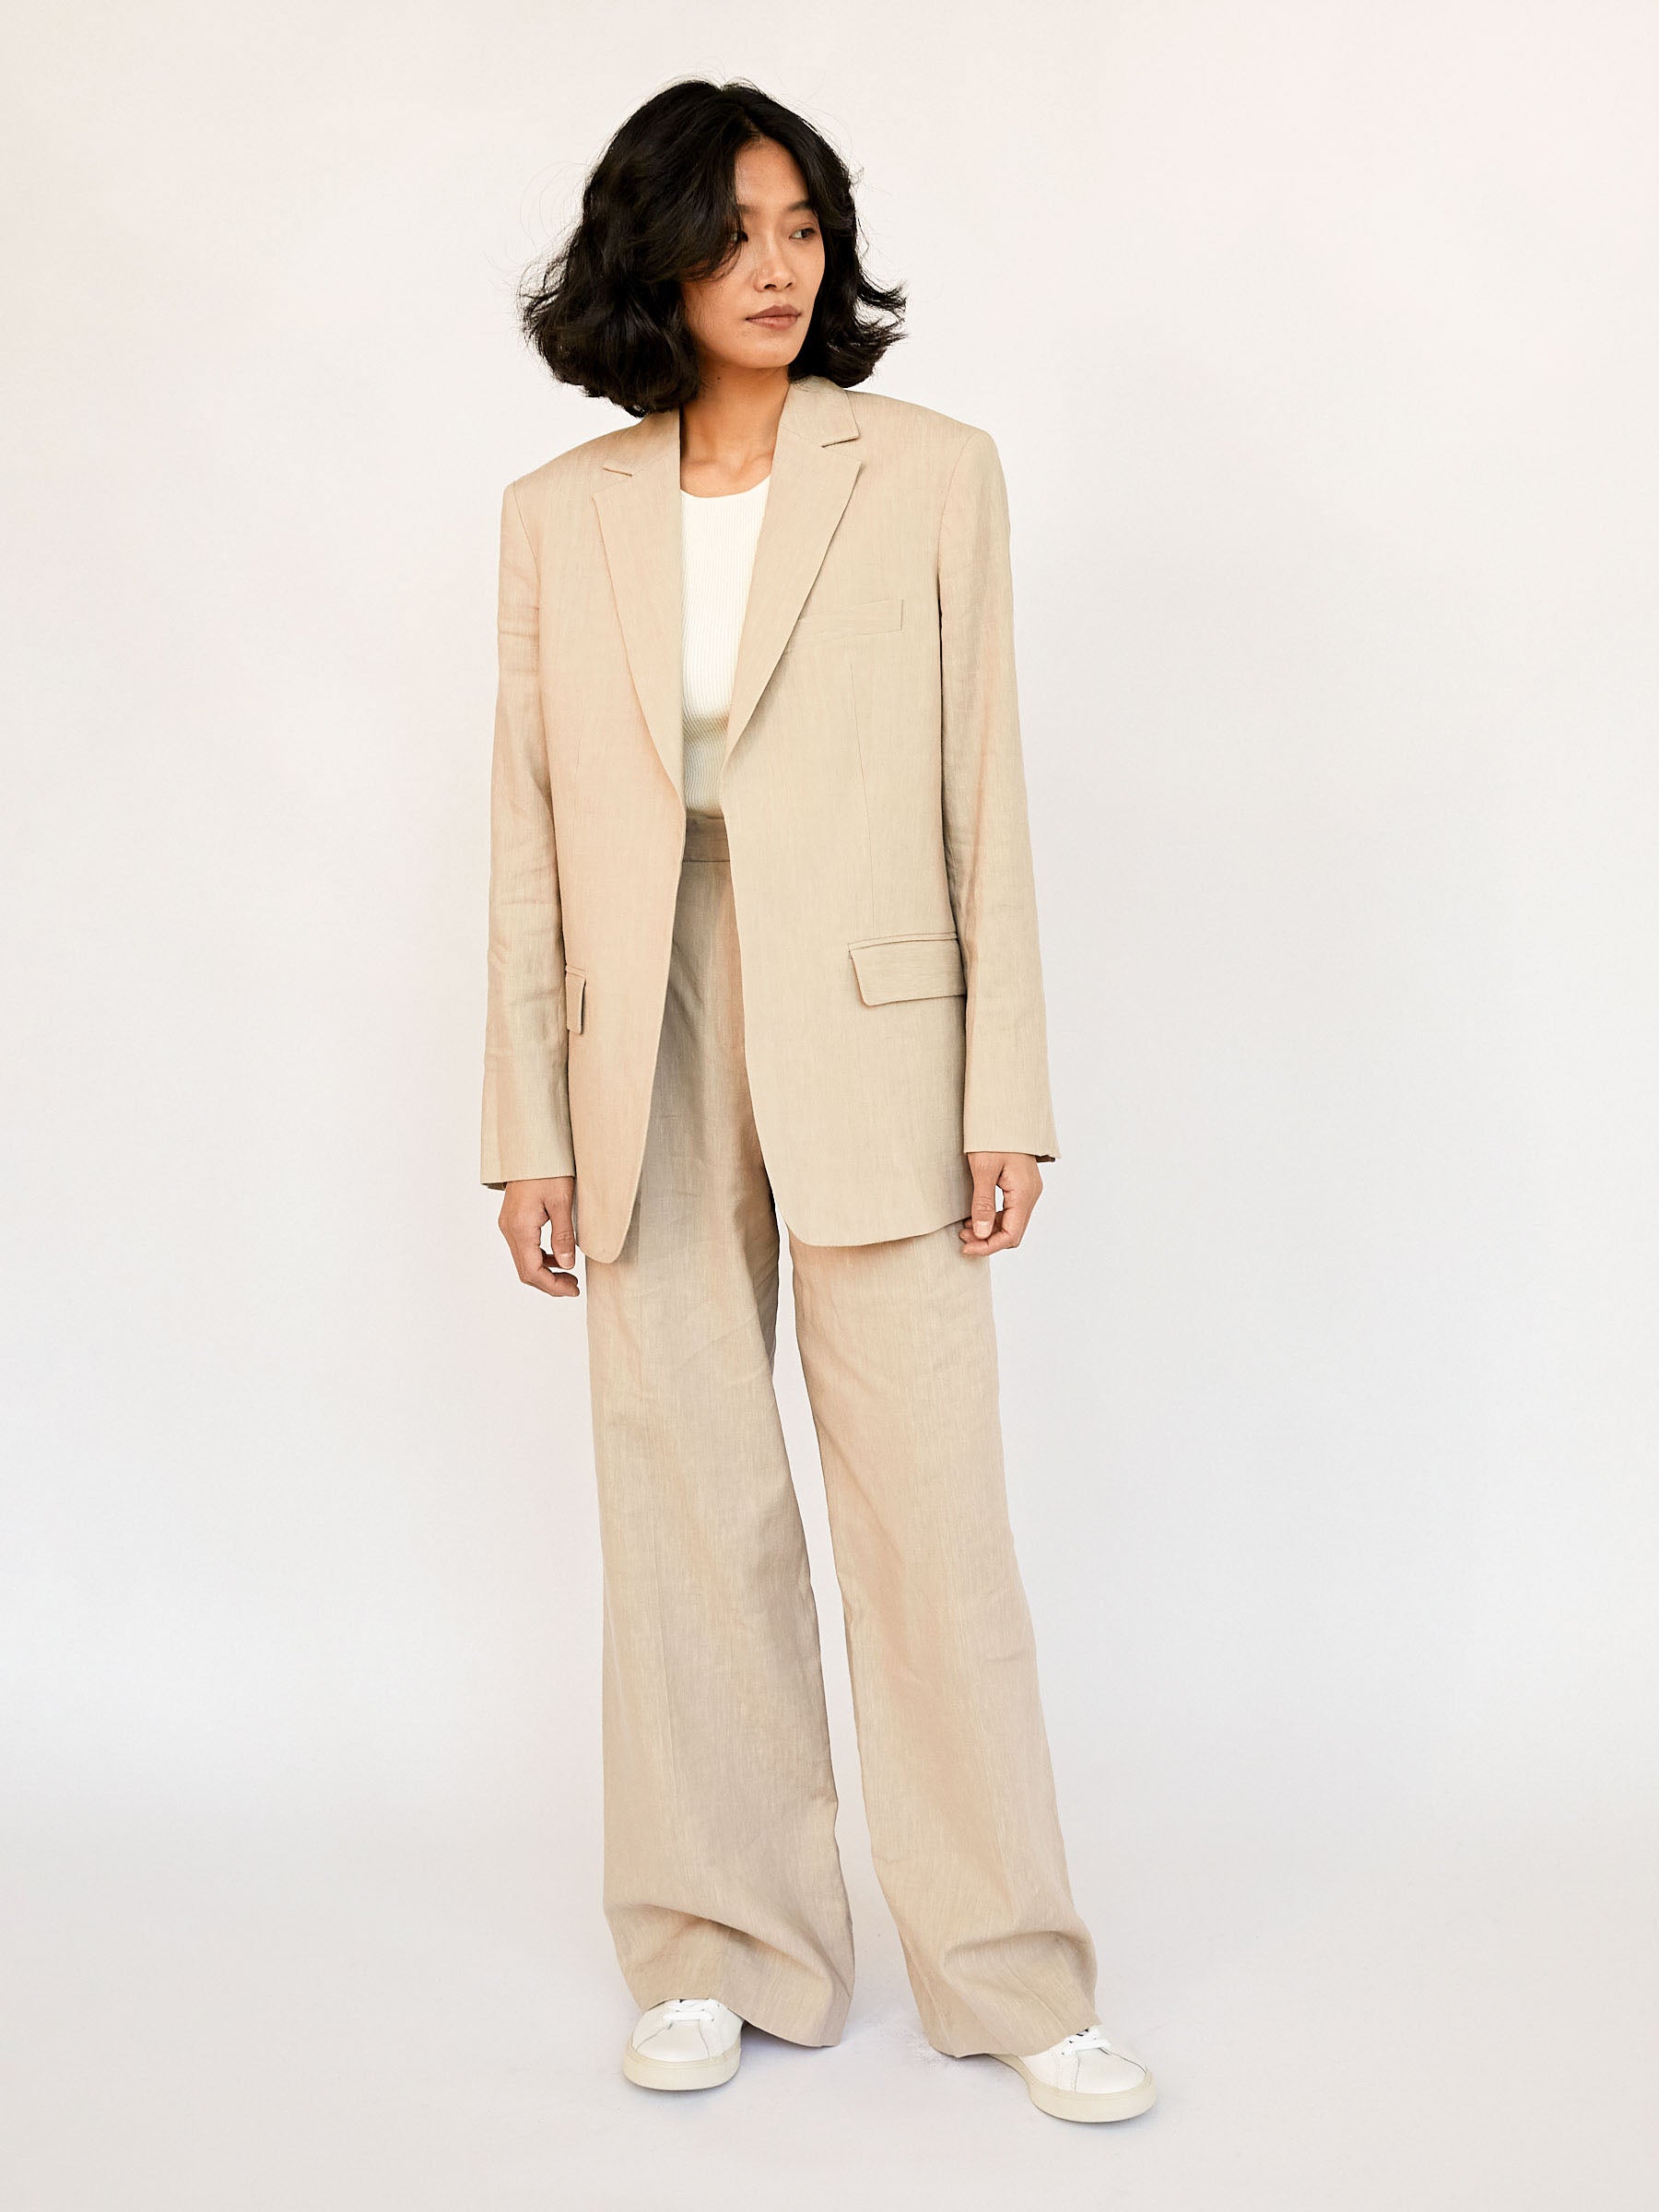 Beige linen high waisted pleated Dress Trousers